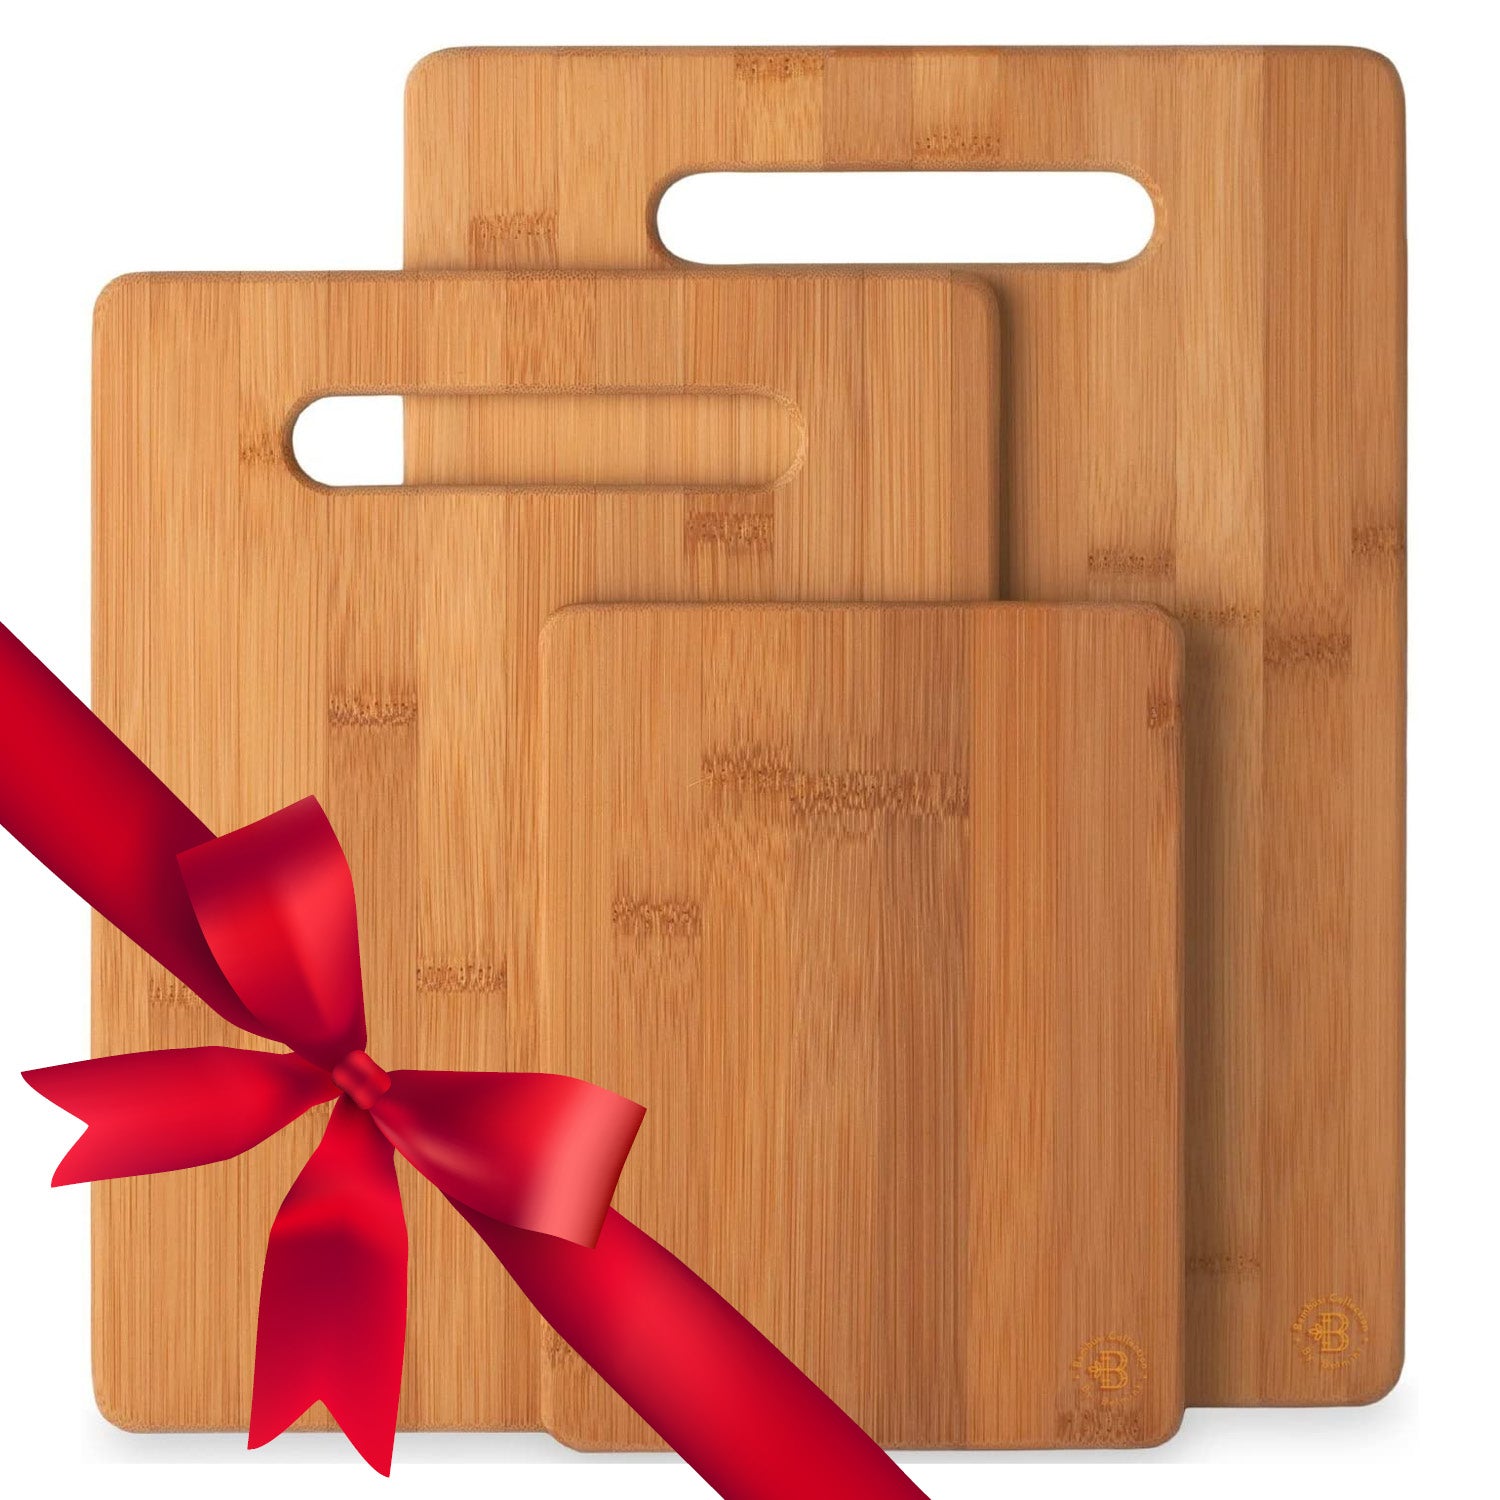 Wood Cutting Boards For Kitchen - Bamboo Cutting Boards For Kitchen Cutting  Board, Bamboo Cutting Board Set, Chopping Board, Butcher Block, Small